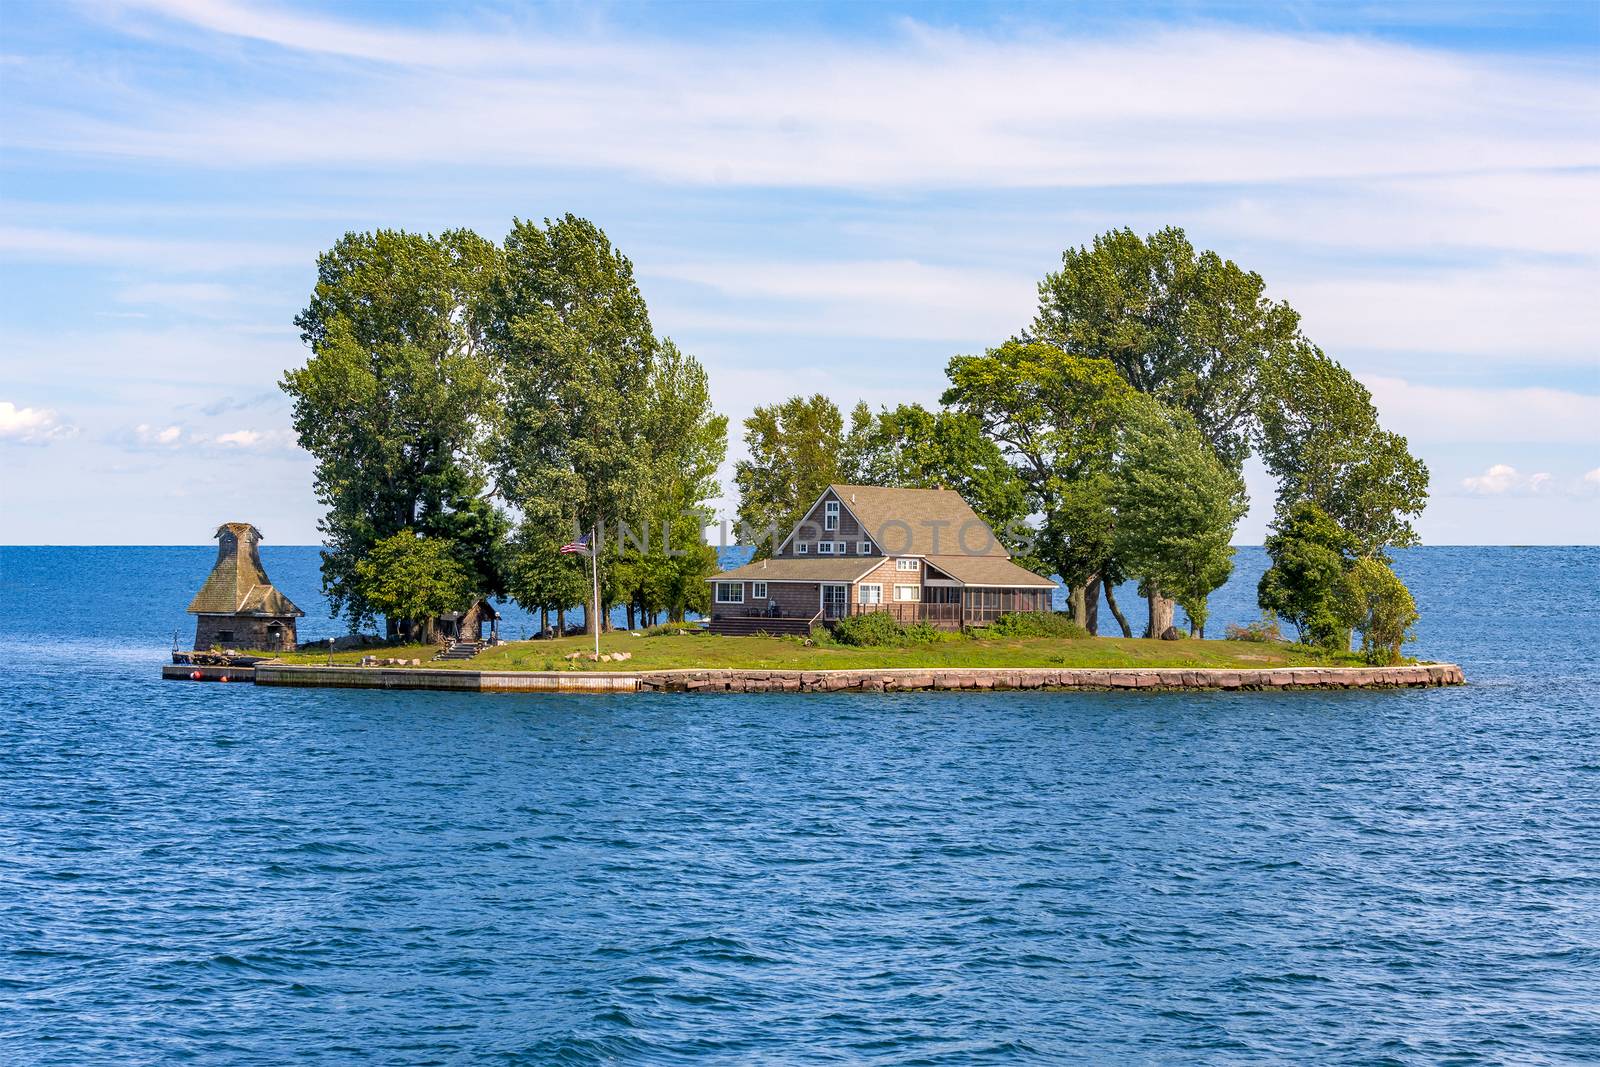 A beautiful house and a couple of large trees fit on a small island in the middle of a large lake